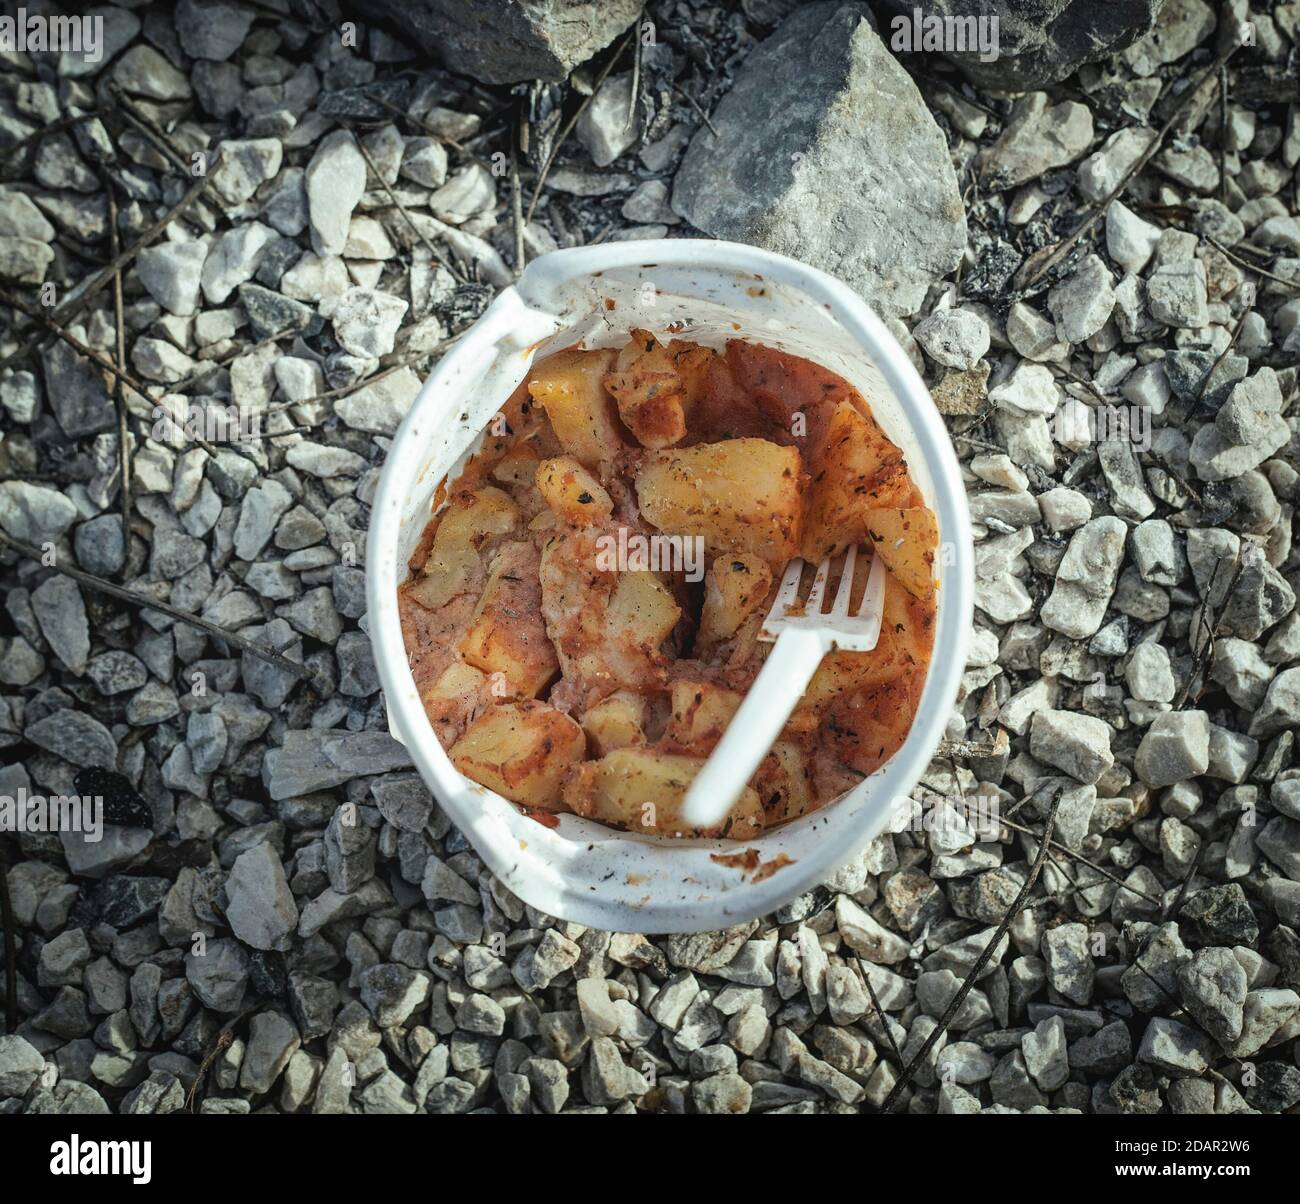 Potato stew, eating of food distribution for refugees in the camp Idomeni, Greece Stock Photo